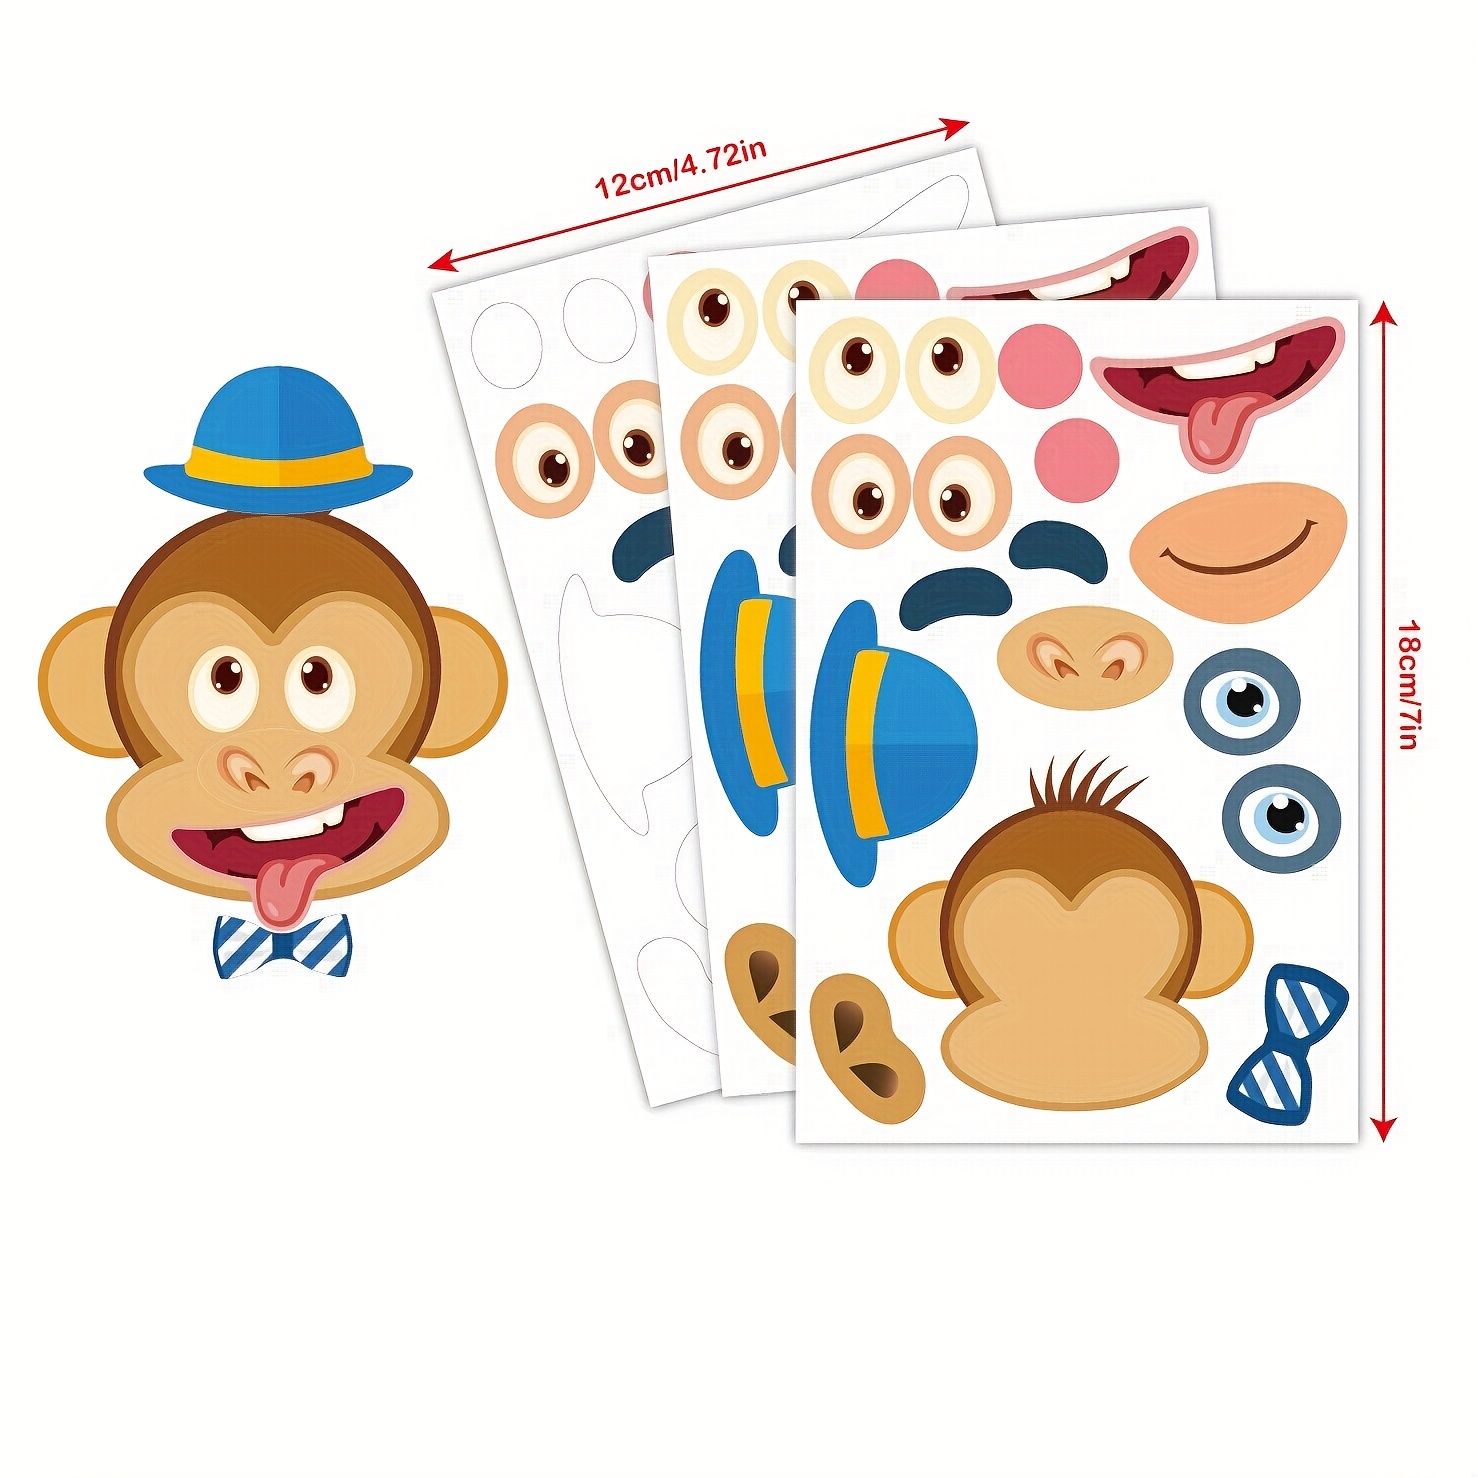 Make a Sticker for Kids, 36 Sheets Make an Animal Stickers, Make Your Own  Stickers Decals for Birthday Party Favors, Boys Girls School Reward